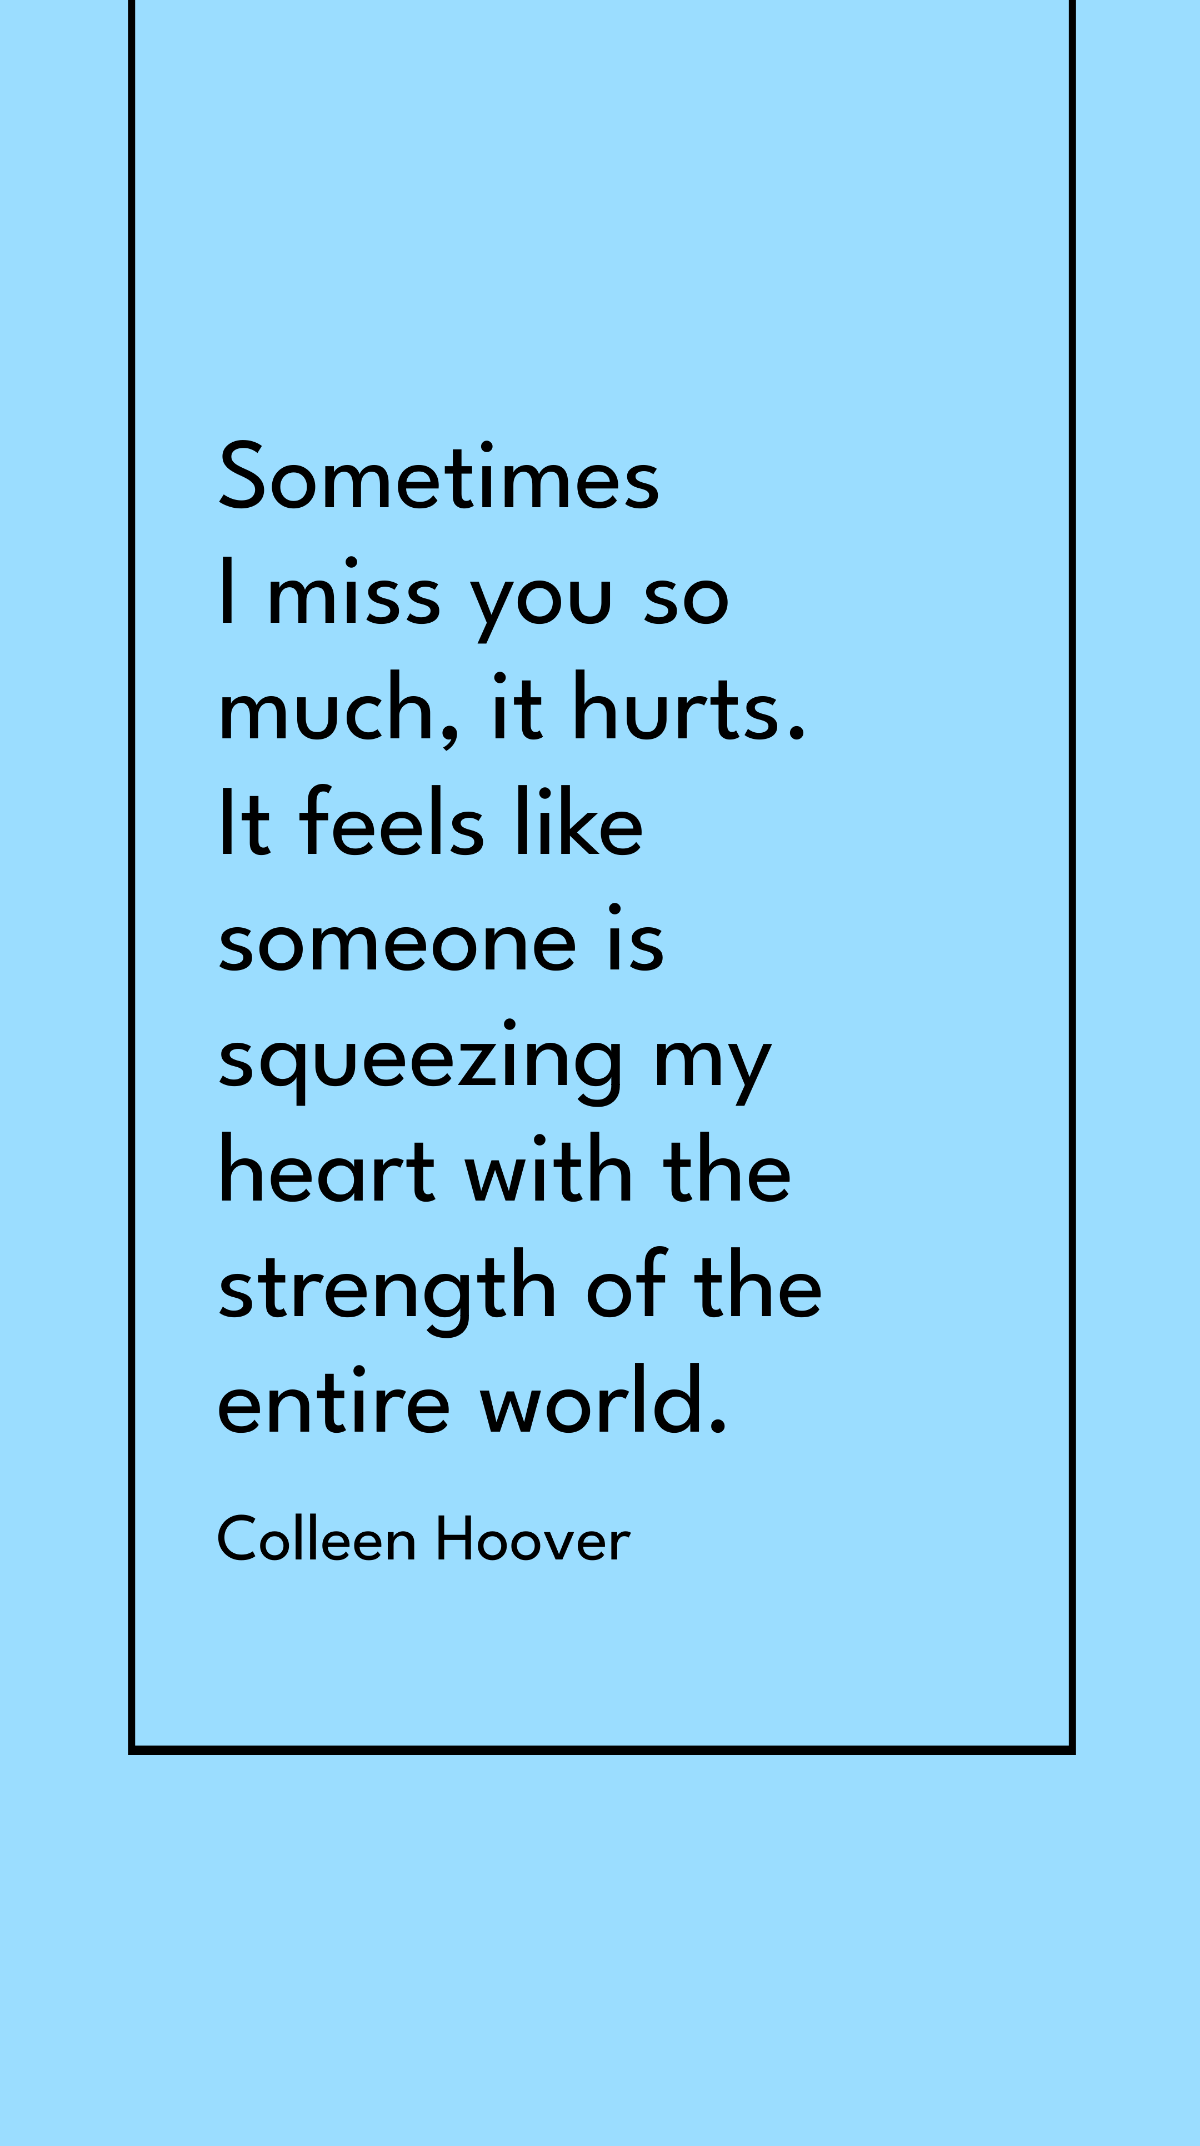 Free Colleen Hoover - Sometimes I miss you so much, it hurts. It feels like someone is squeezing my heart with the strength of the entire world. Template